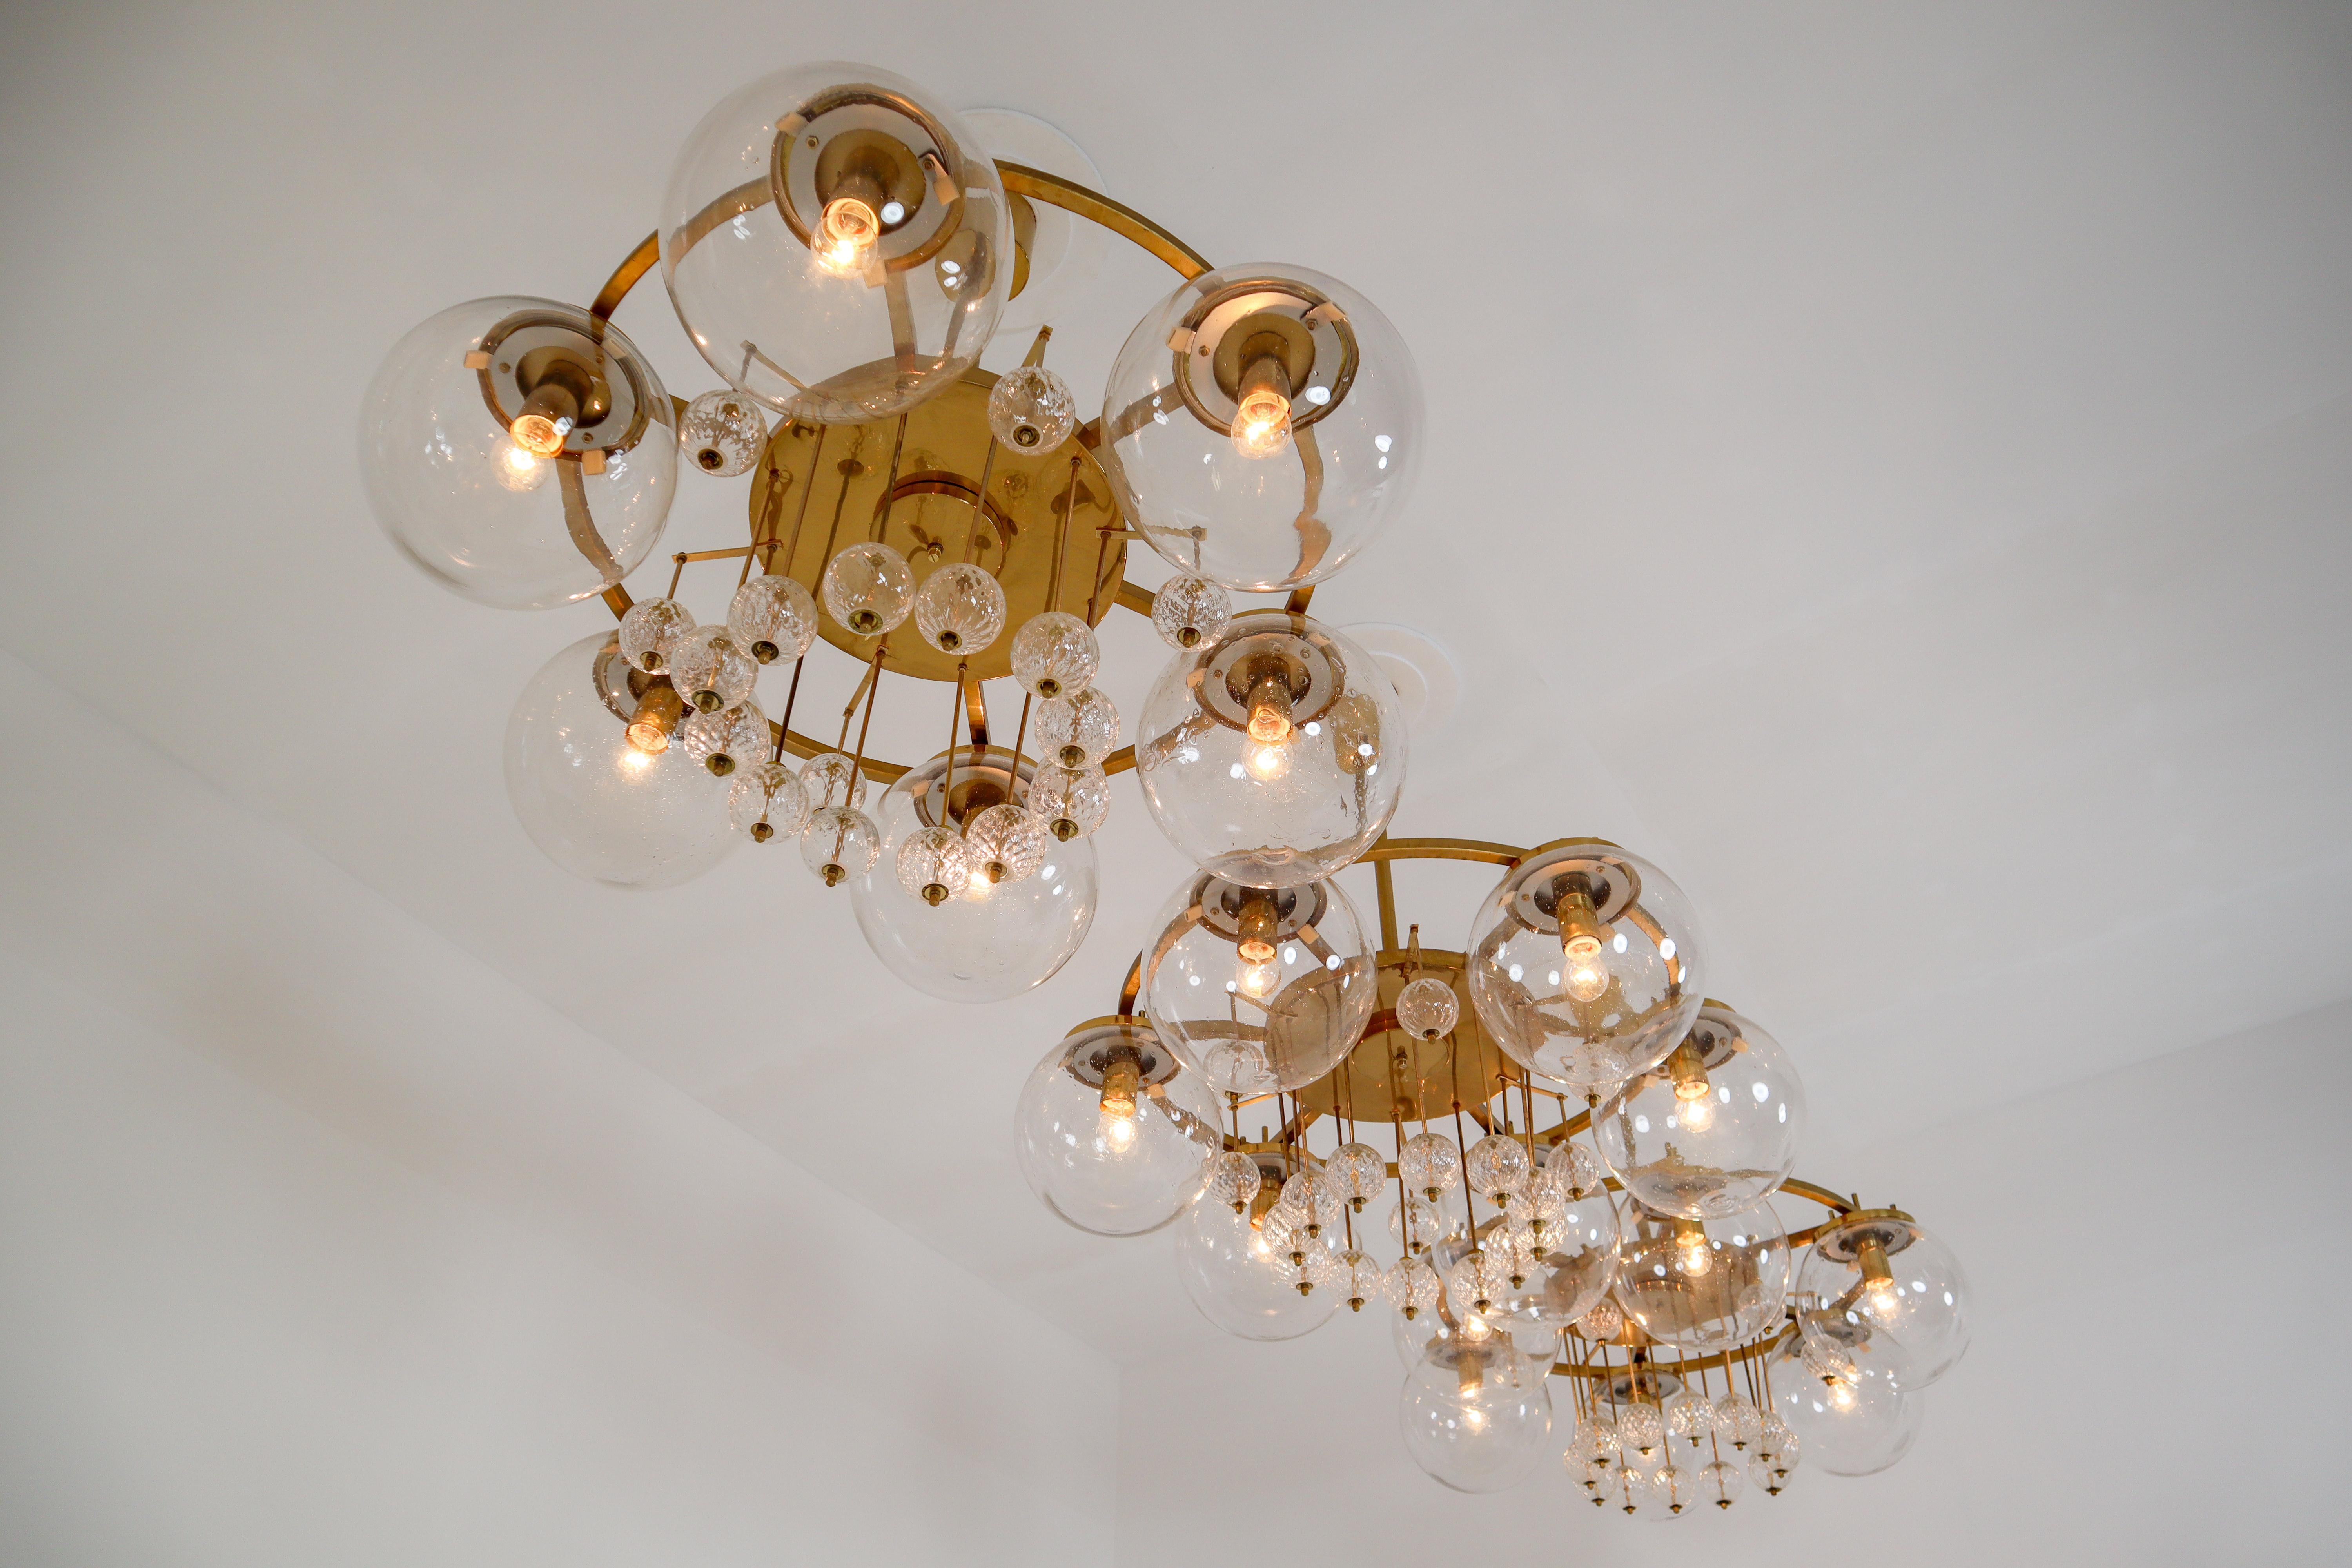 Large hotel chandeliers with brass fixture and large hand blowed glass. The chandeliers with brass frame consist of six lights, formed in a circle, with glass shades. The pleasant light it spreads is very atmospheric. Completed with the structured